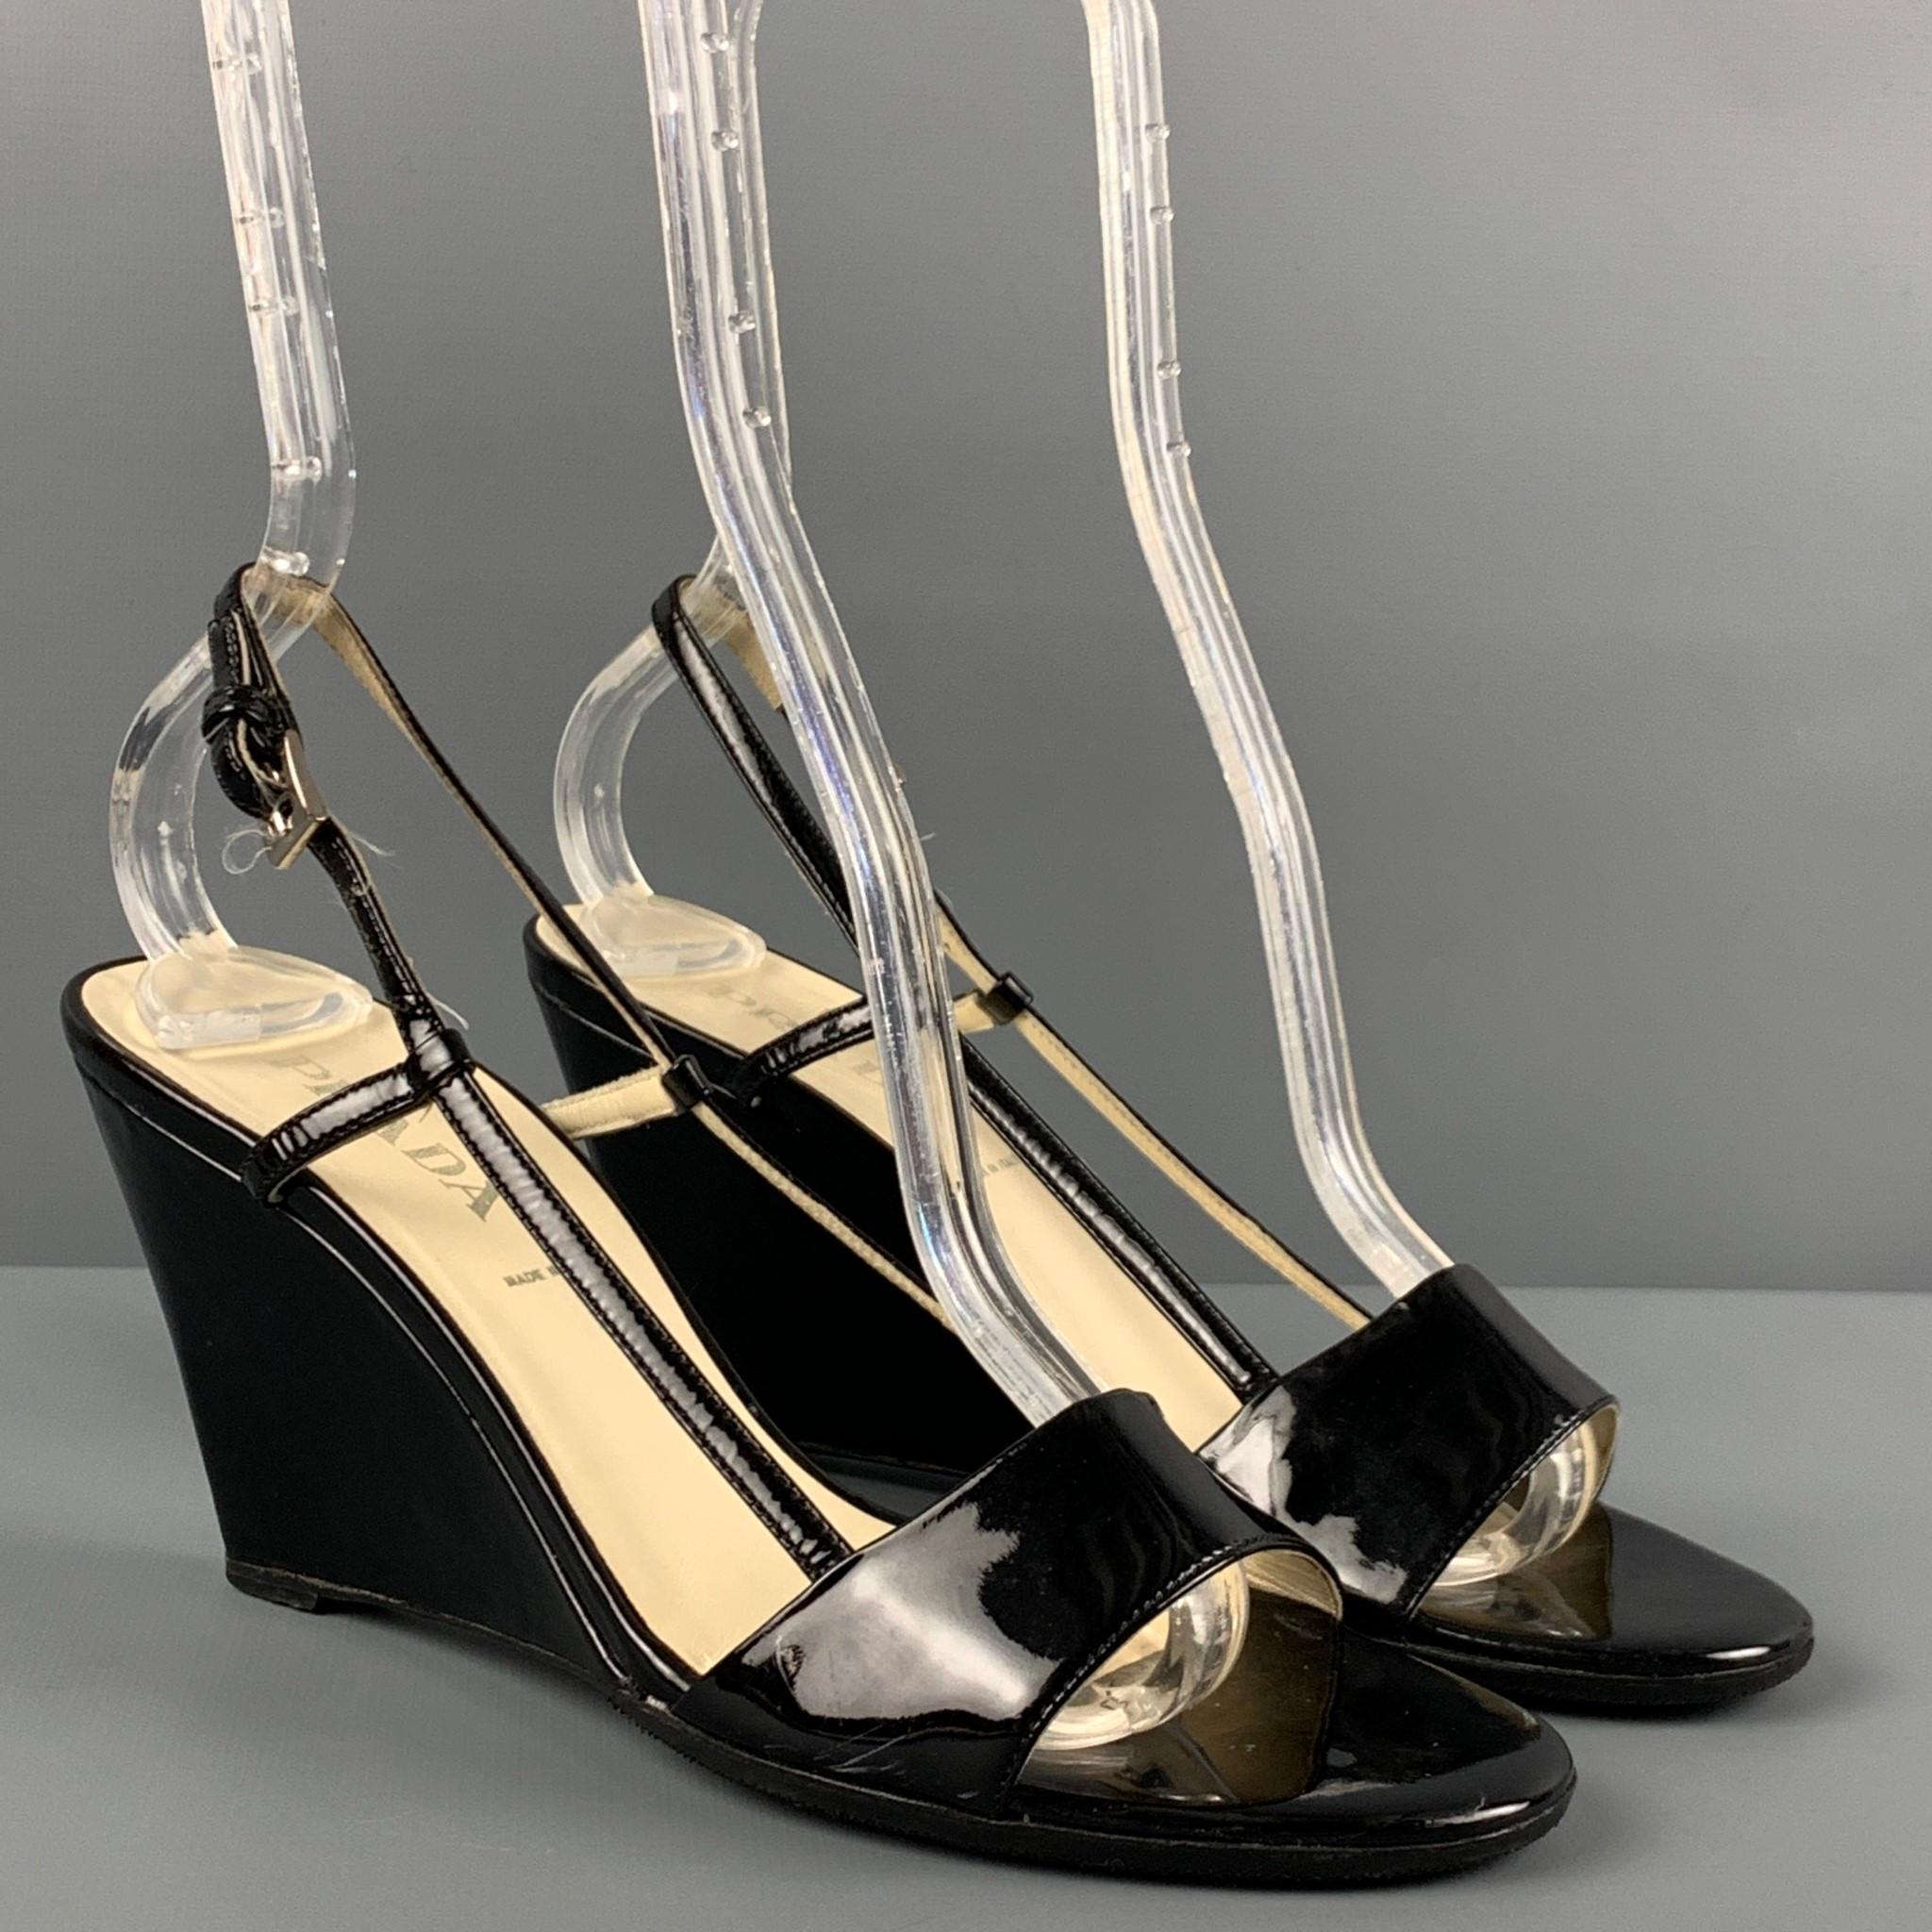 PRADA wedges comes in a black patent leather featuring a open toe, slingback closure, and a wedge heel. Made in Italy. 

Very Good Pre-Owned Condition.
Marked: 36.5

Measurements:

Heel: 3.25 in. 